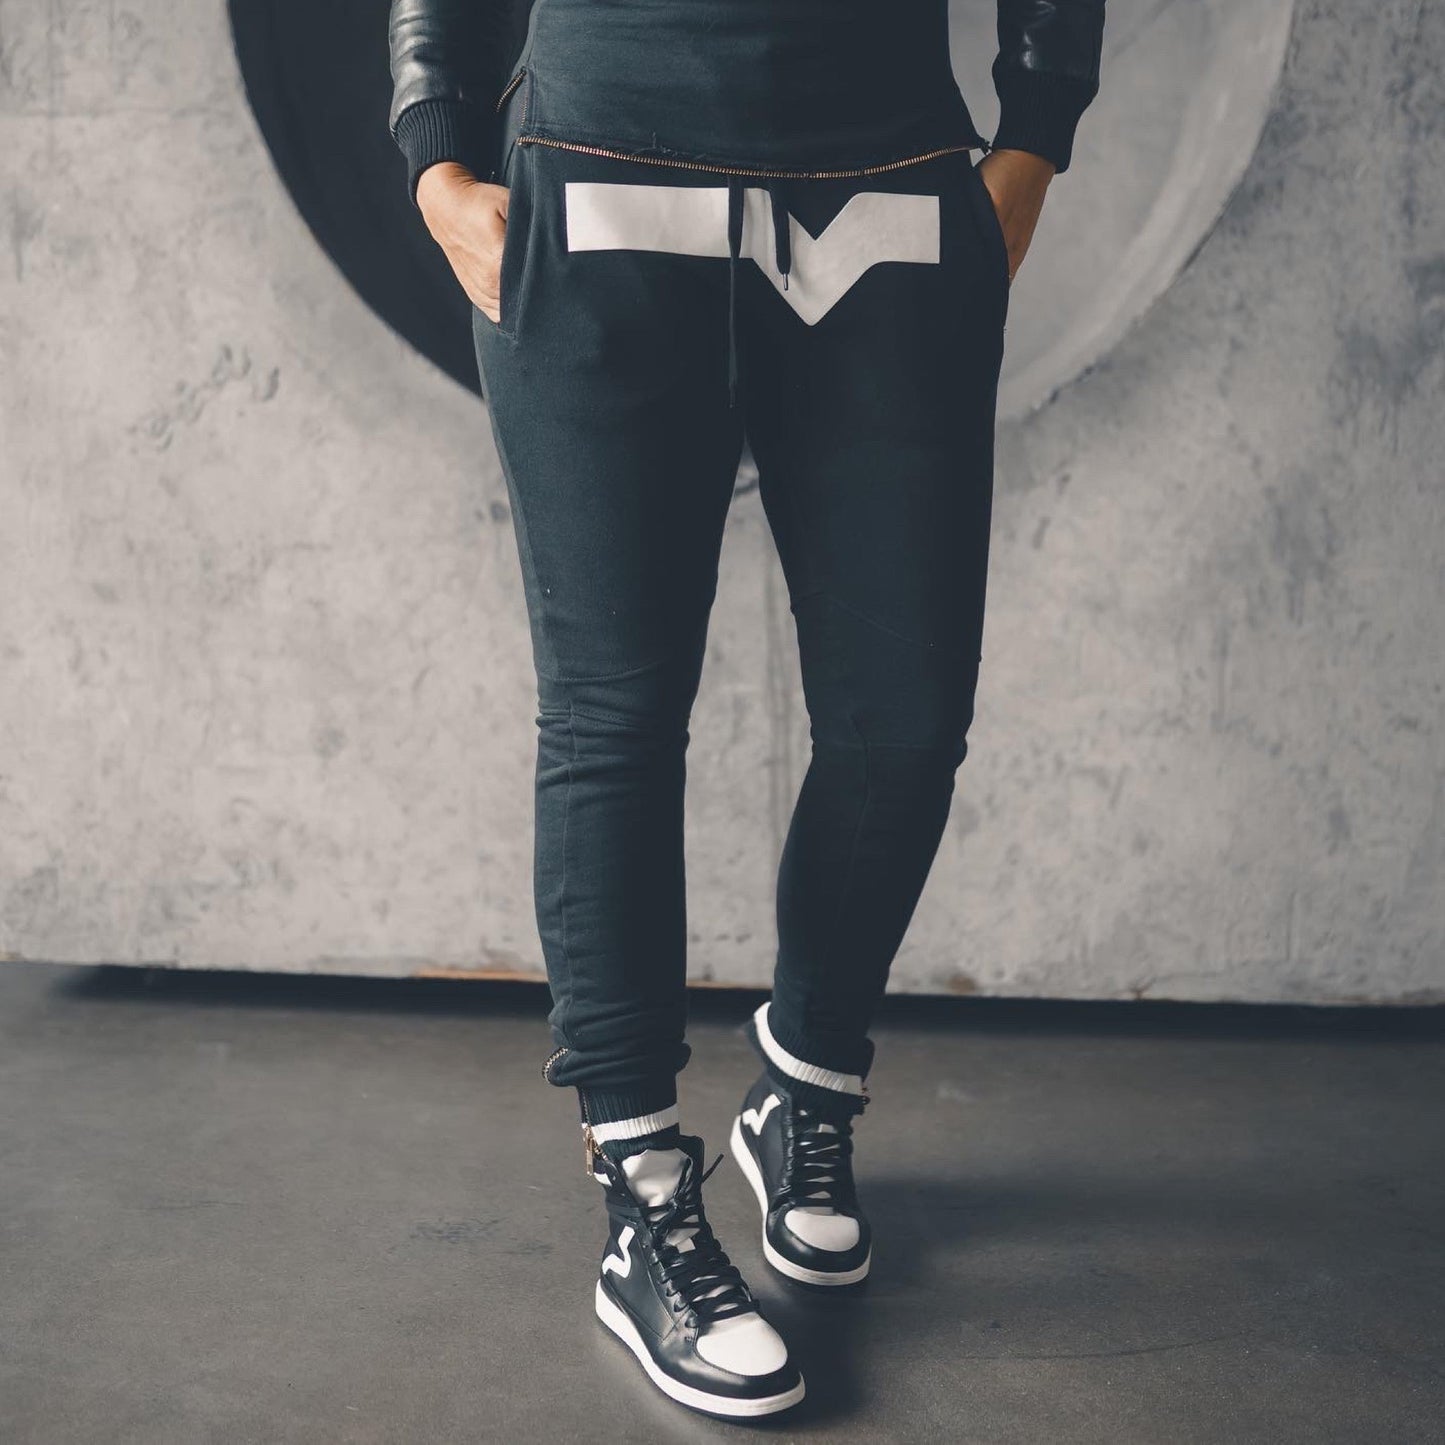 Elevated Valley Sweats